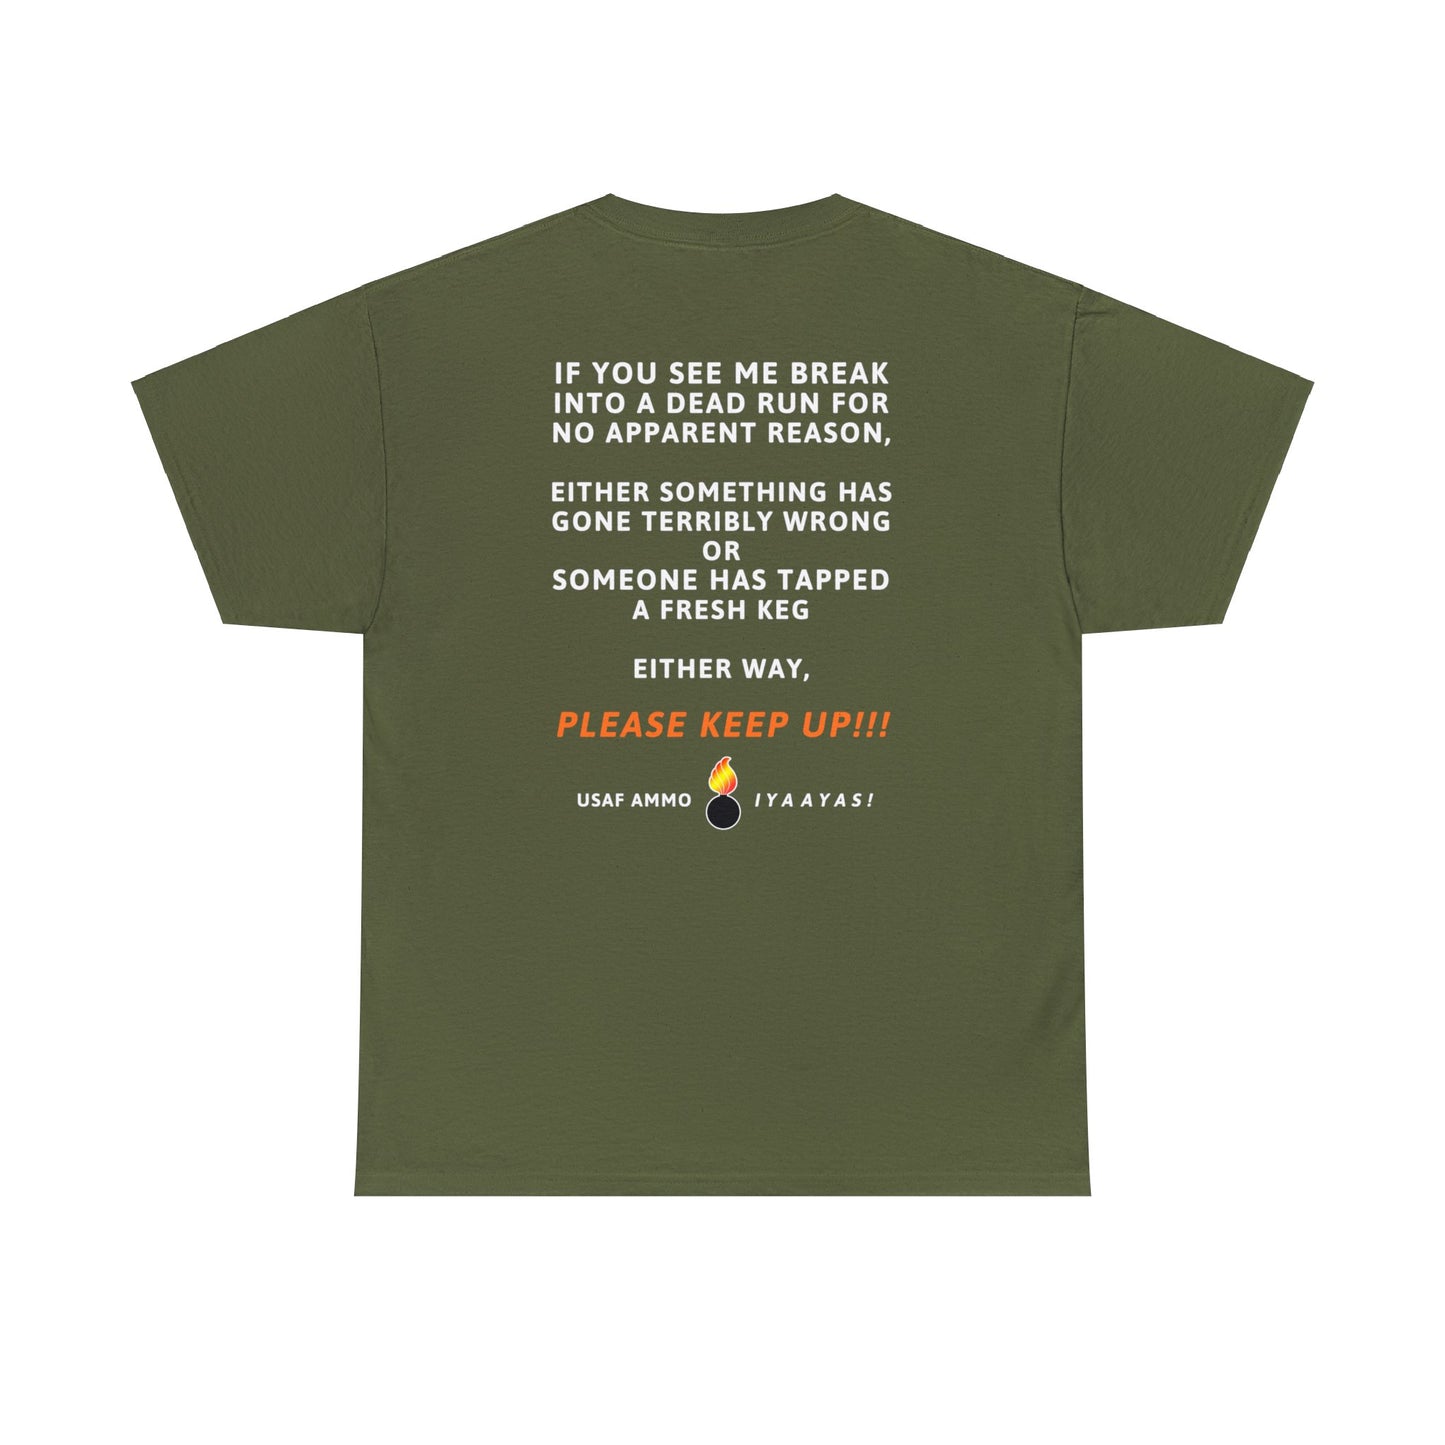 USAF AMMO If You See Me Break Into A Dead Fun Something Wrong Or Fresh Keg Tapped Munitions Heritage Gift Men's T-Shirt